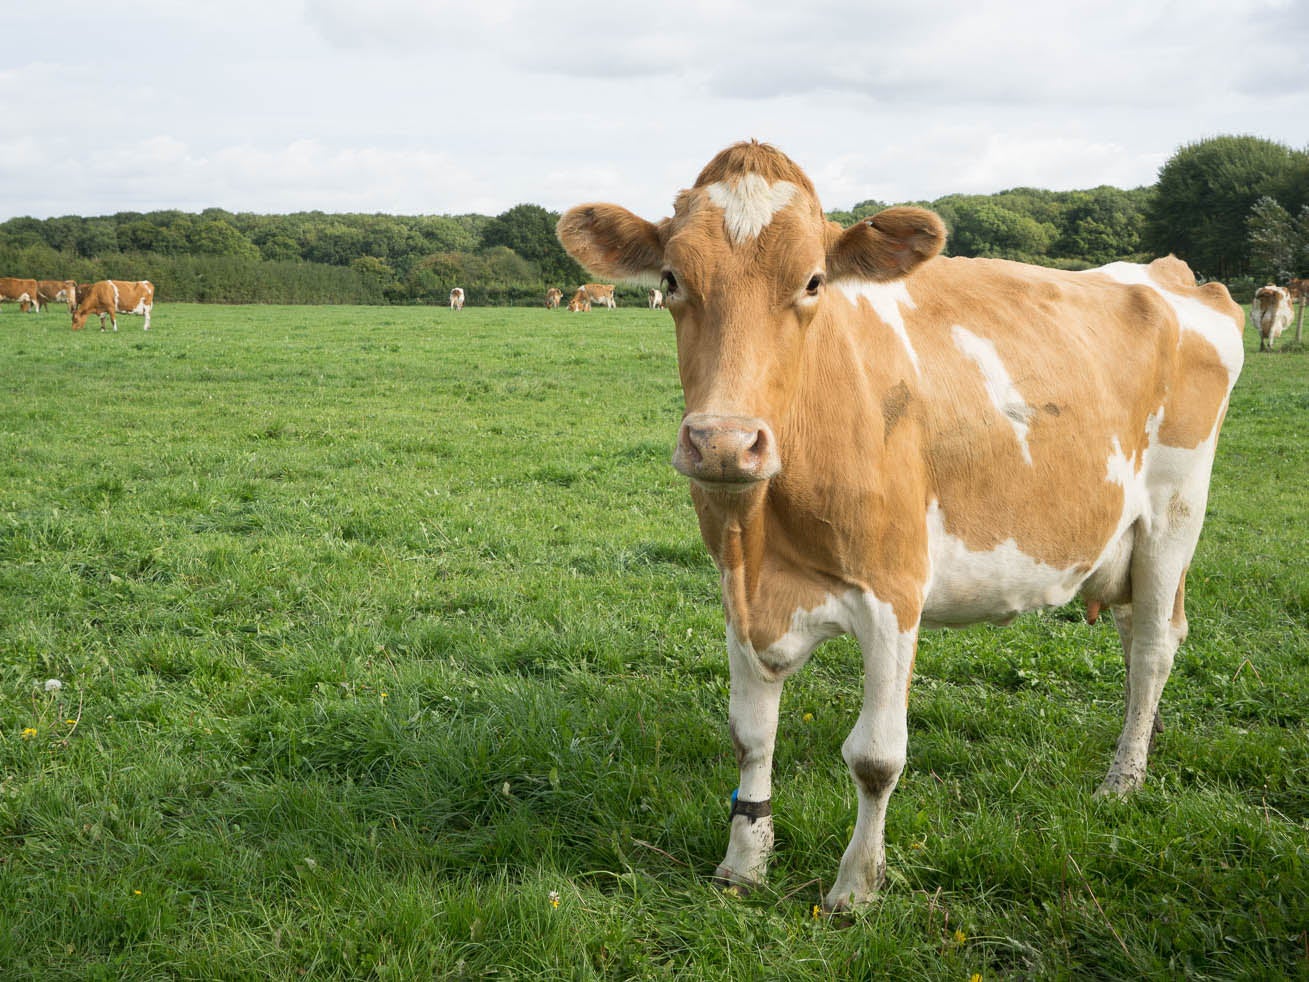 Milk that comes from cows like these on Berkeley Farm in Swindon contains around 50 per cent more beneficial omega-3 fatty acids